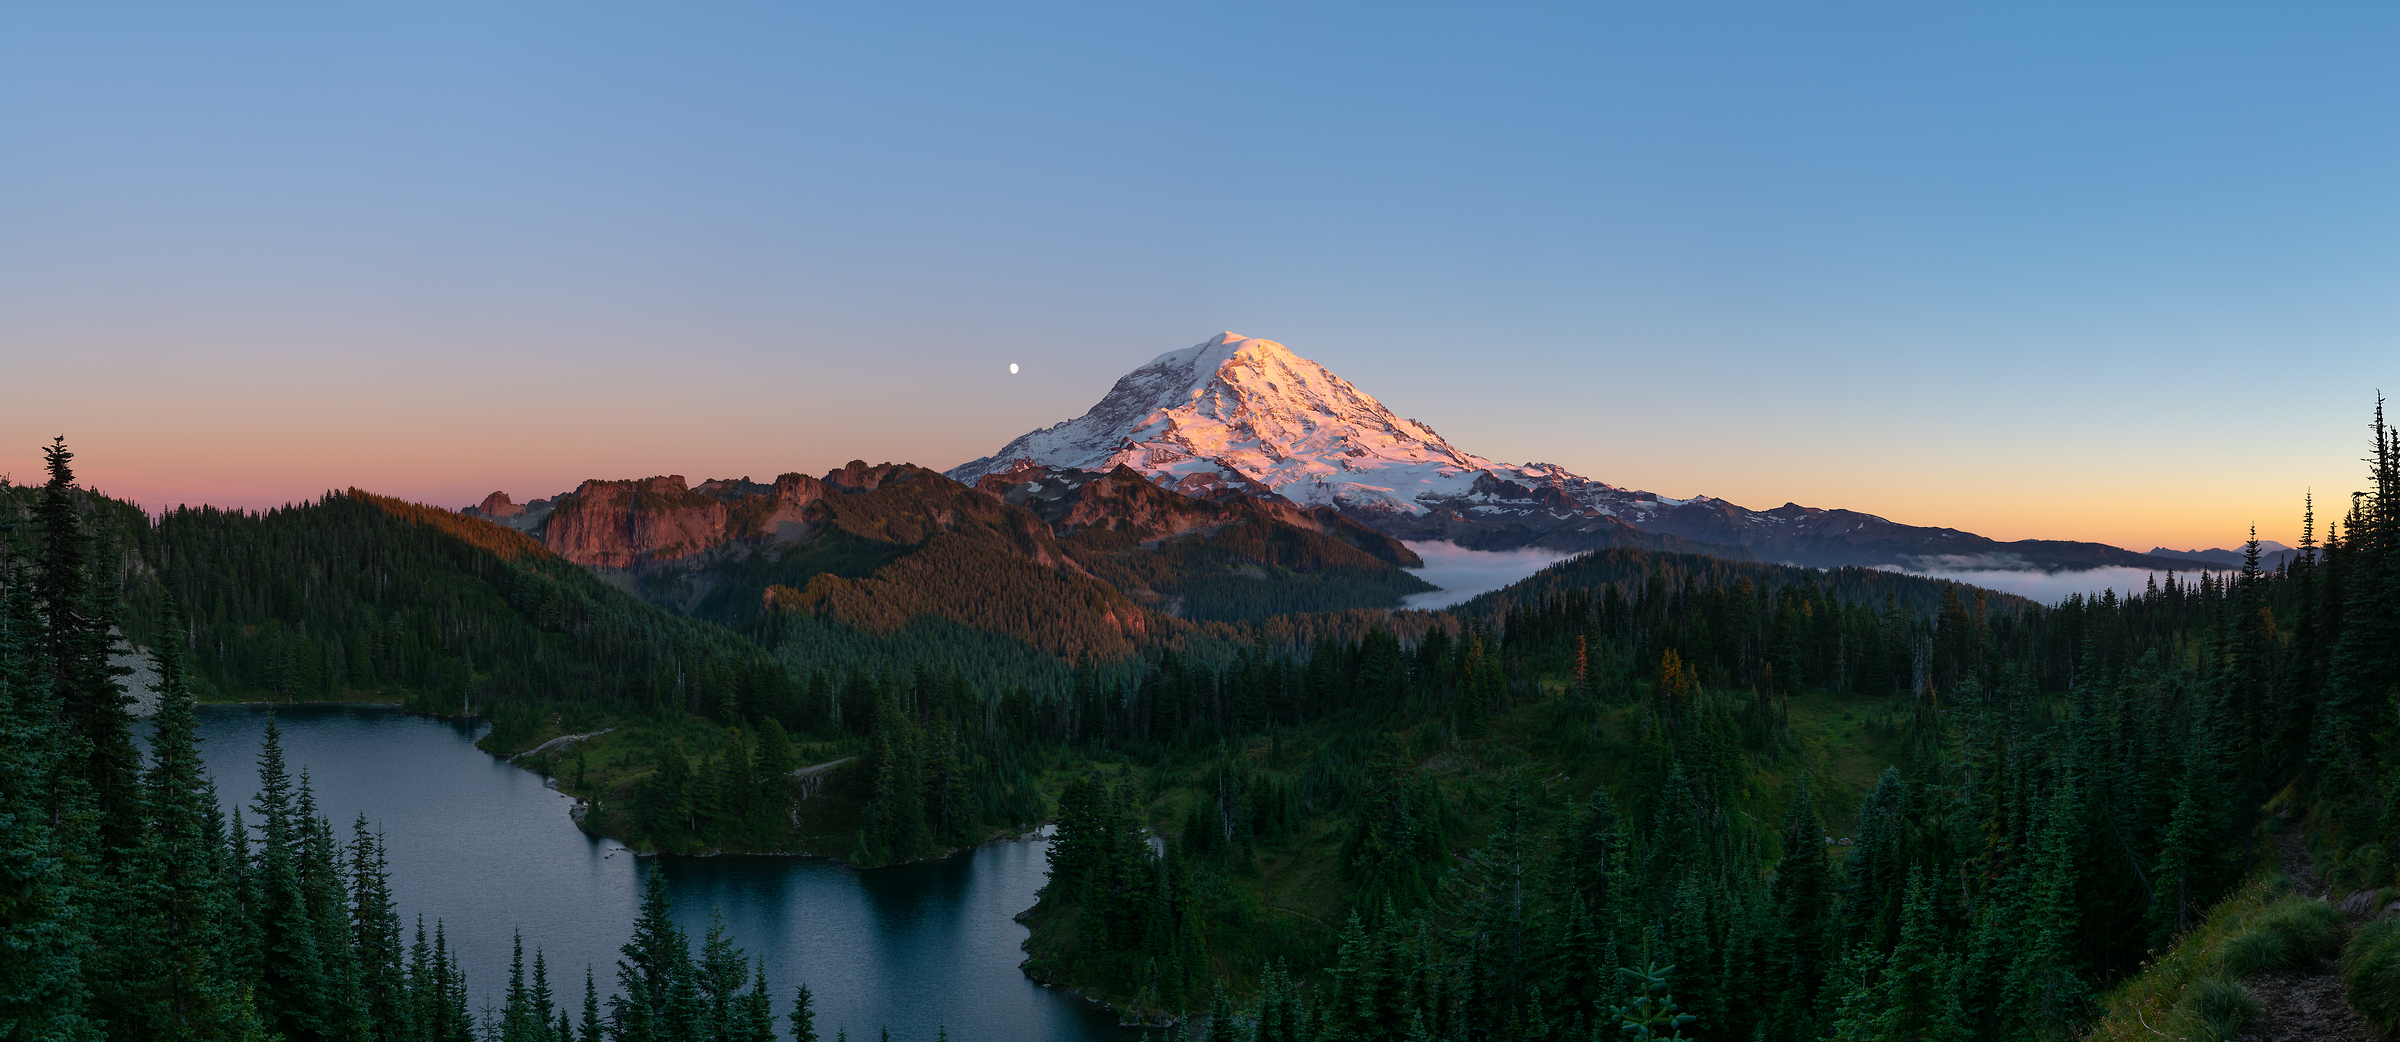 172 megapixels! A very high resolution, large-format VAST photo print of Mount Rainier and the moon at sunset; landscape photograph created by Greg Probst in Mount Rainier National Park, Washington